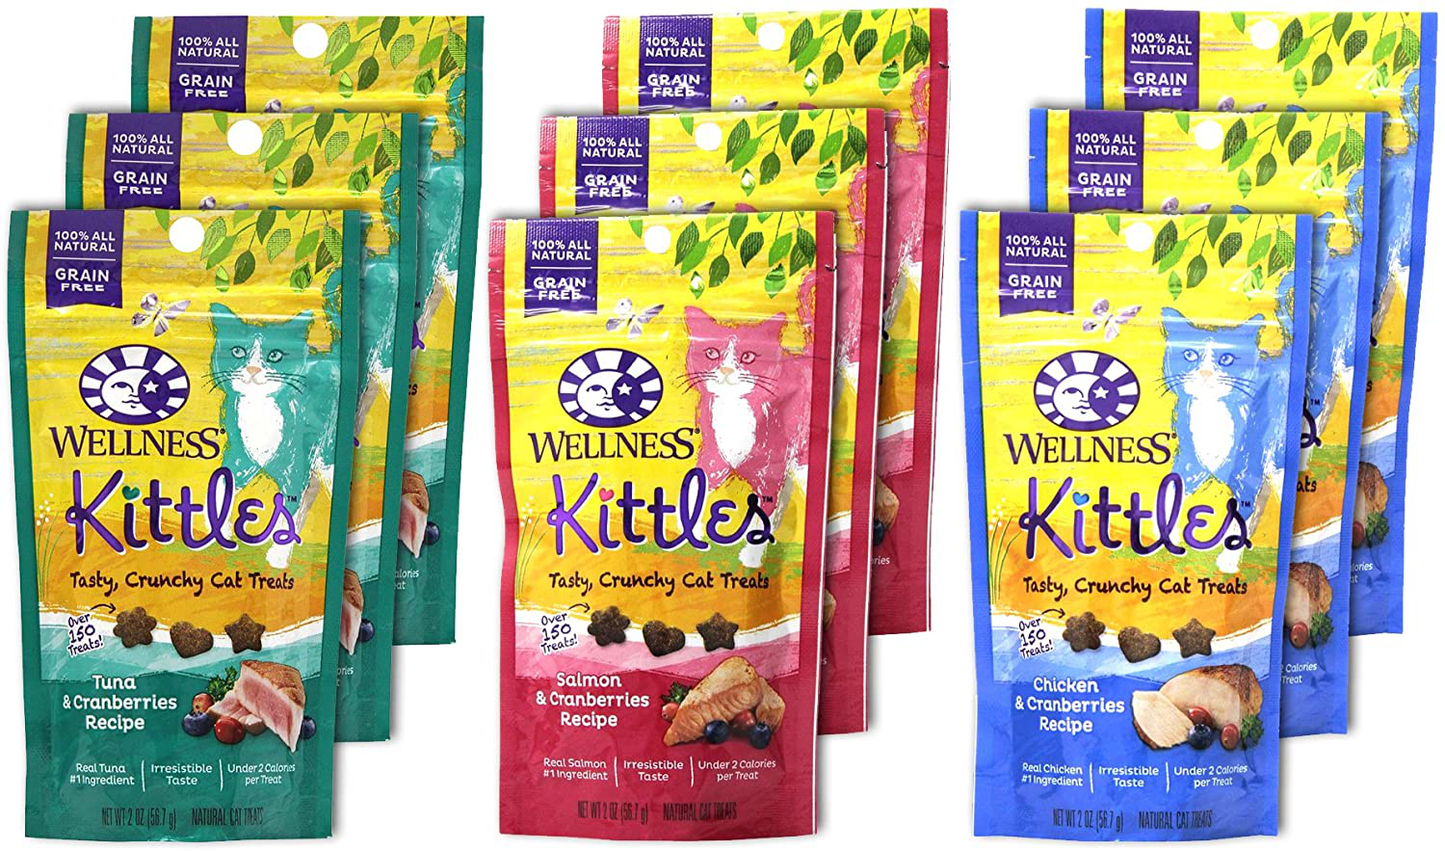 Wellness Kittles Cat Treat Variety Pack - 3 Flavors (Chicken & Cranberries, Salmon & Cranberries, and Tuna & Cranberries Flavors) - 2 Oz Each (9 Total Pouches)